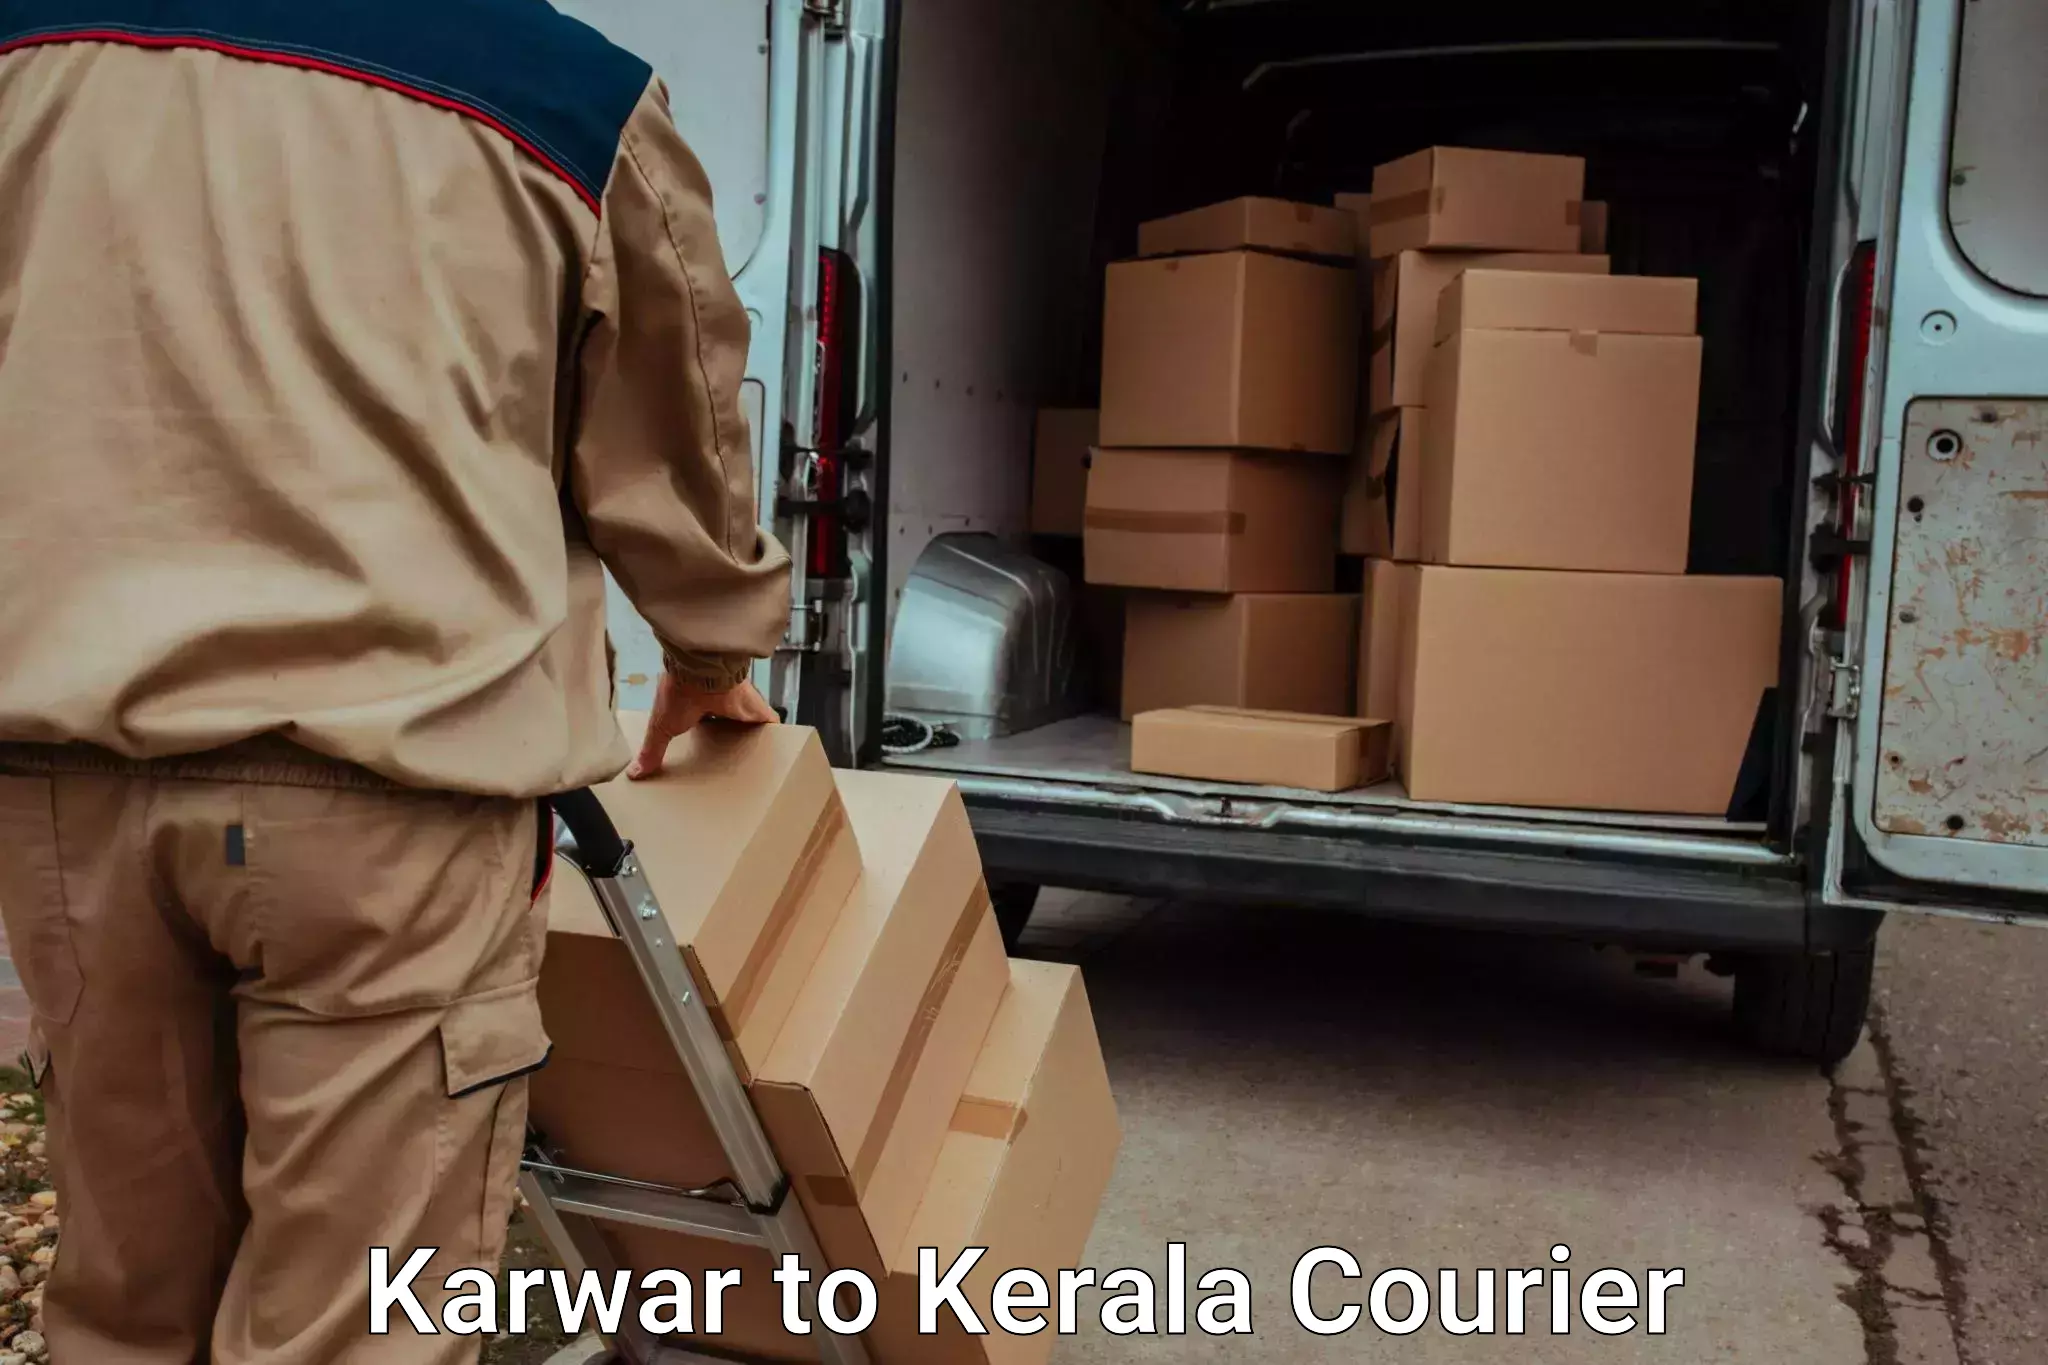 Baggage transport cost Karwar to Cochin University of Science and Technology